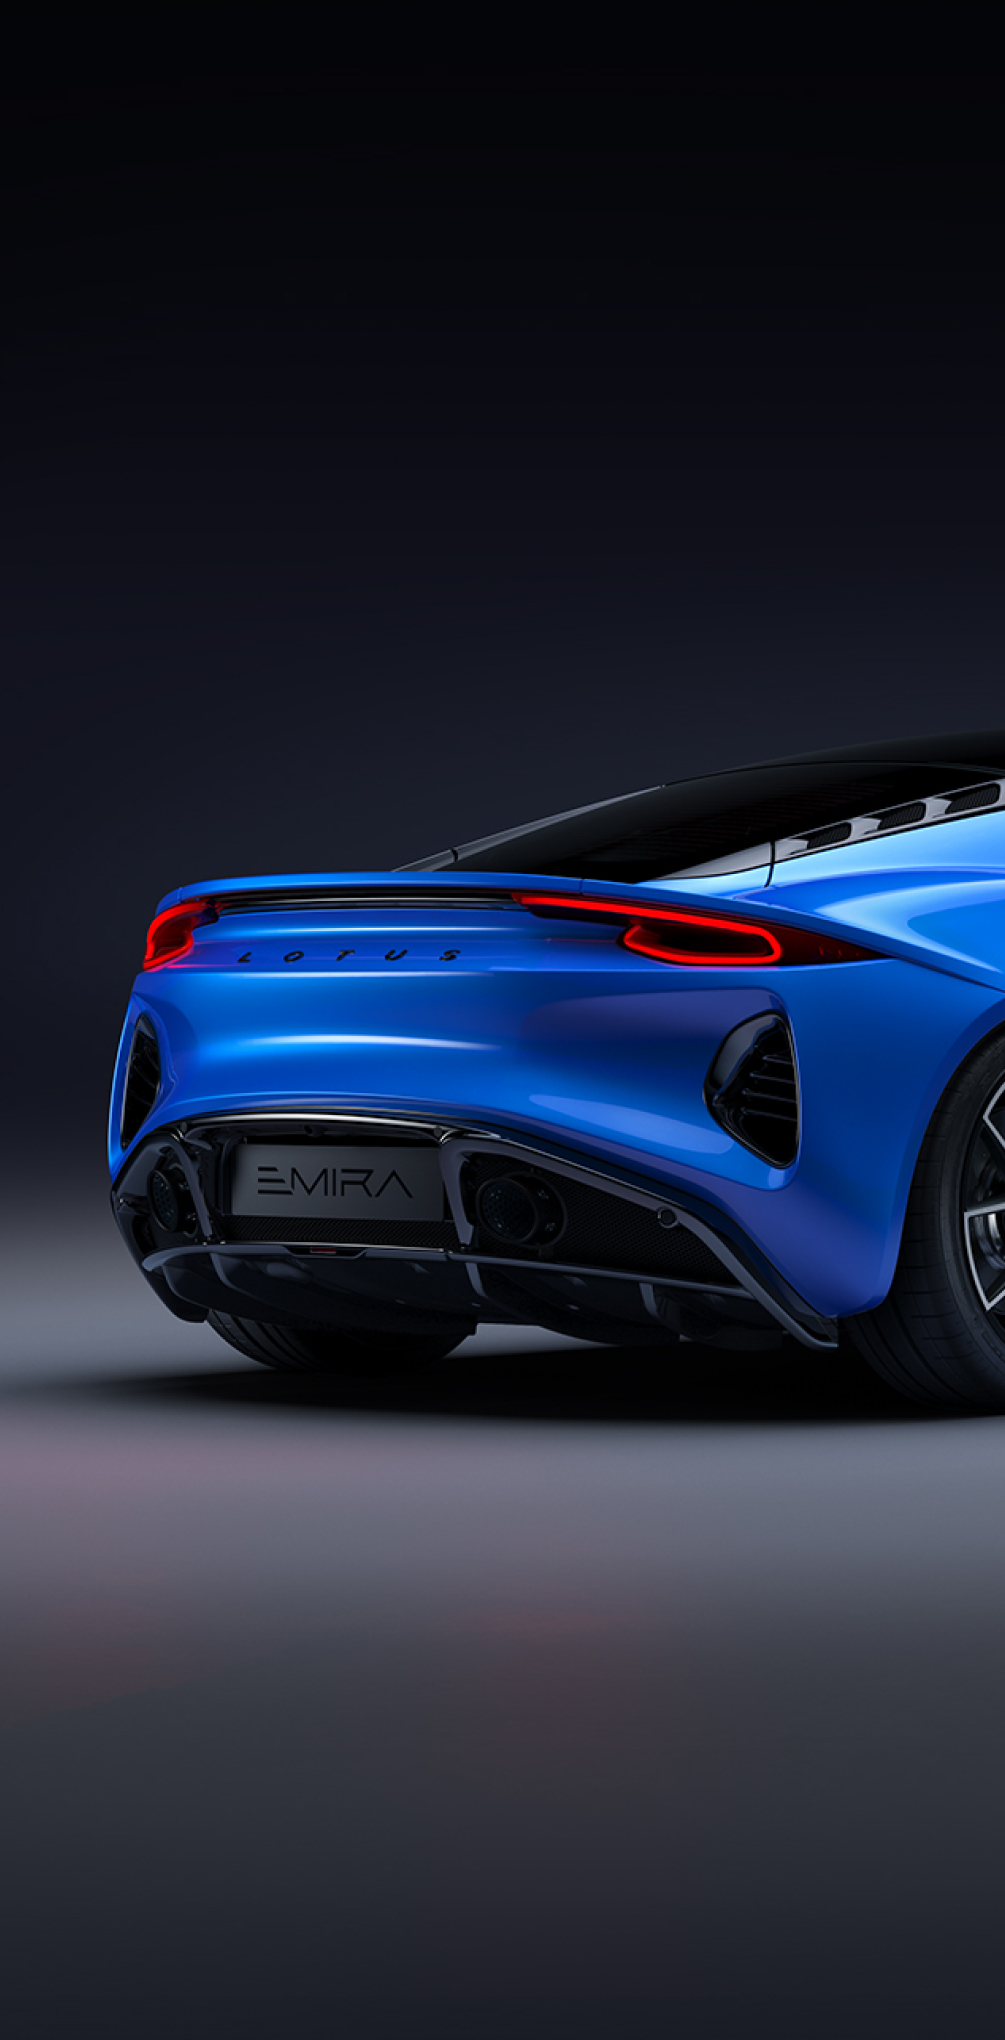 Rear angled shot of a blue Lotus Emira in an abstract grey environment. The rear running lights are glowing red